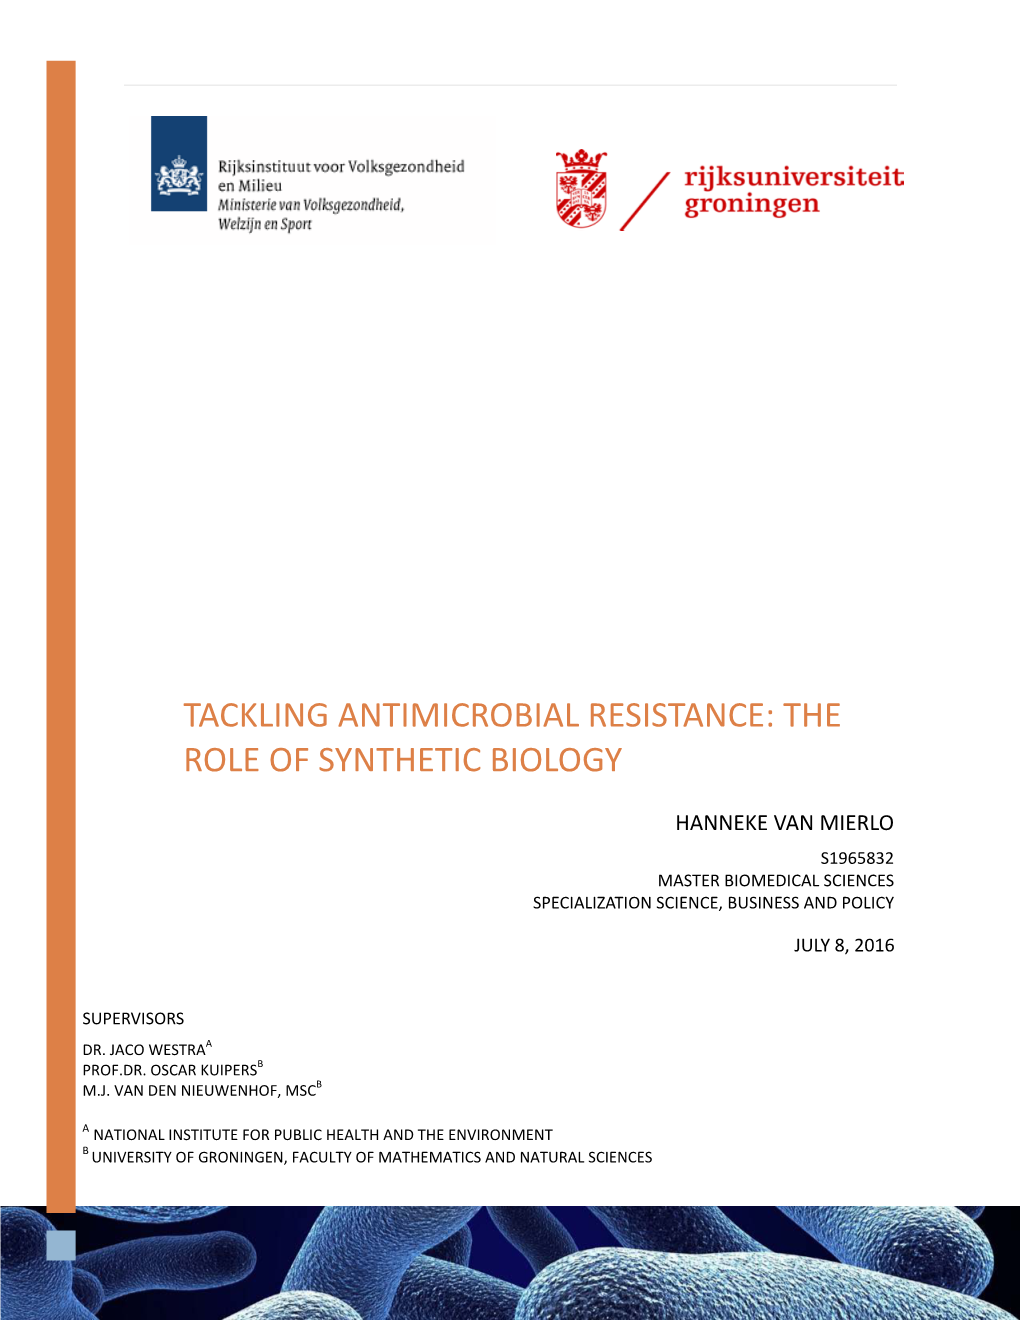 Tackling Antimicrobial Resistance: the Role of Synthetic Biology